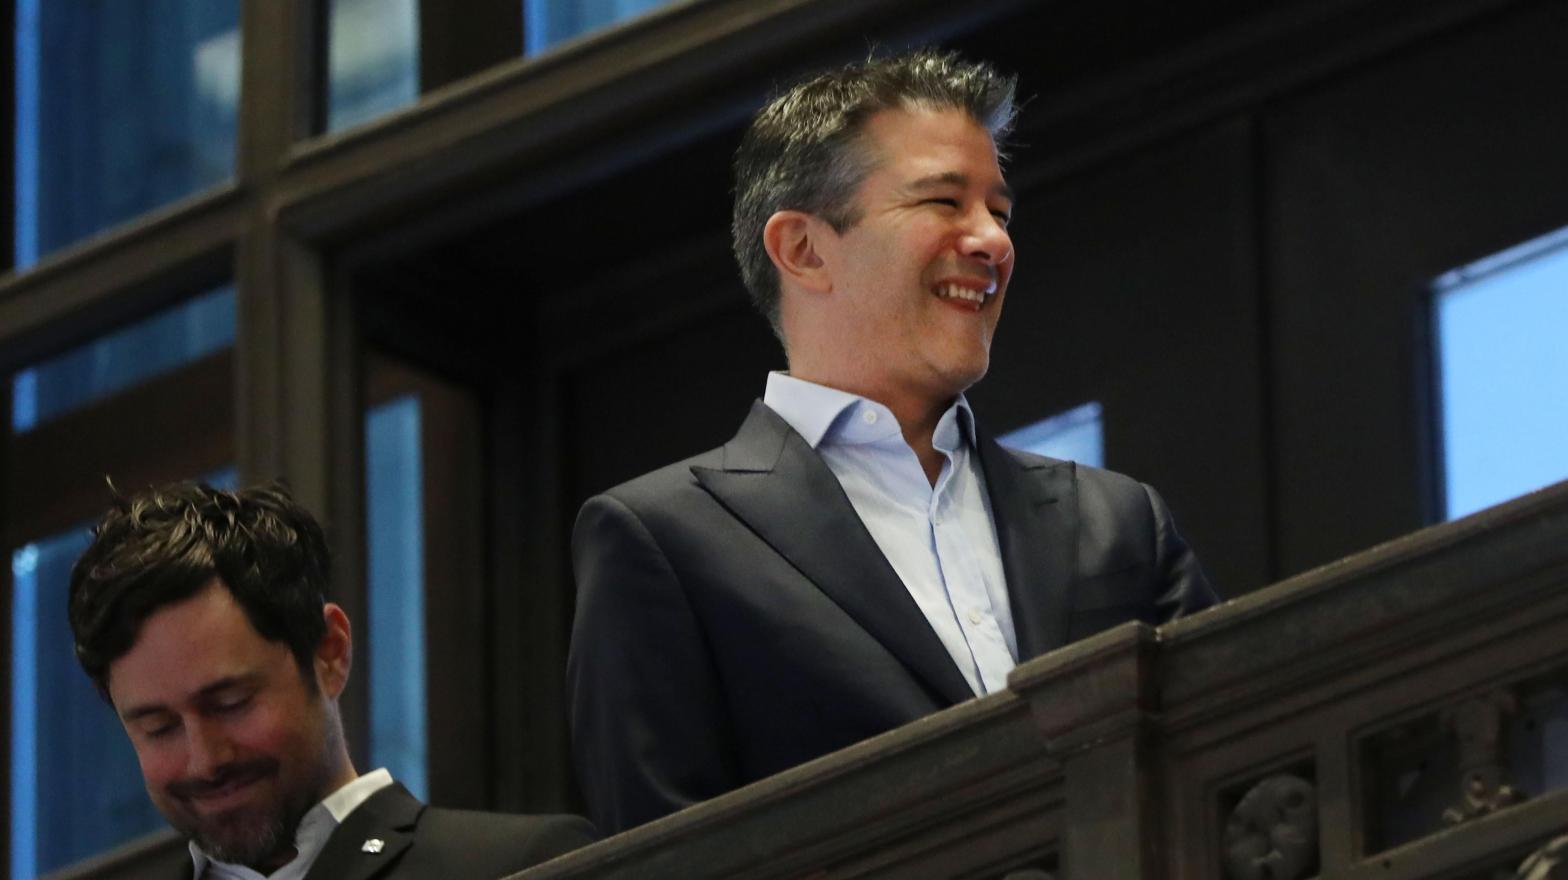 Uber's co-founder and former CEO Travis Kalanick looks out at the floor of the New York Stock Exchange (NYSE) on May 10, 2019 in New York City. (Photo: Spencer Platt, Getty Images)